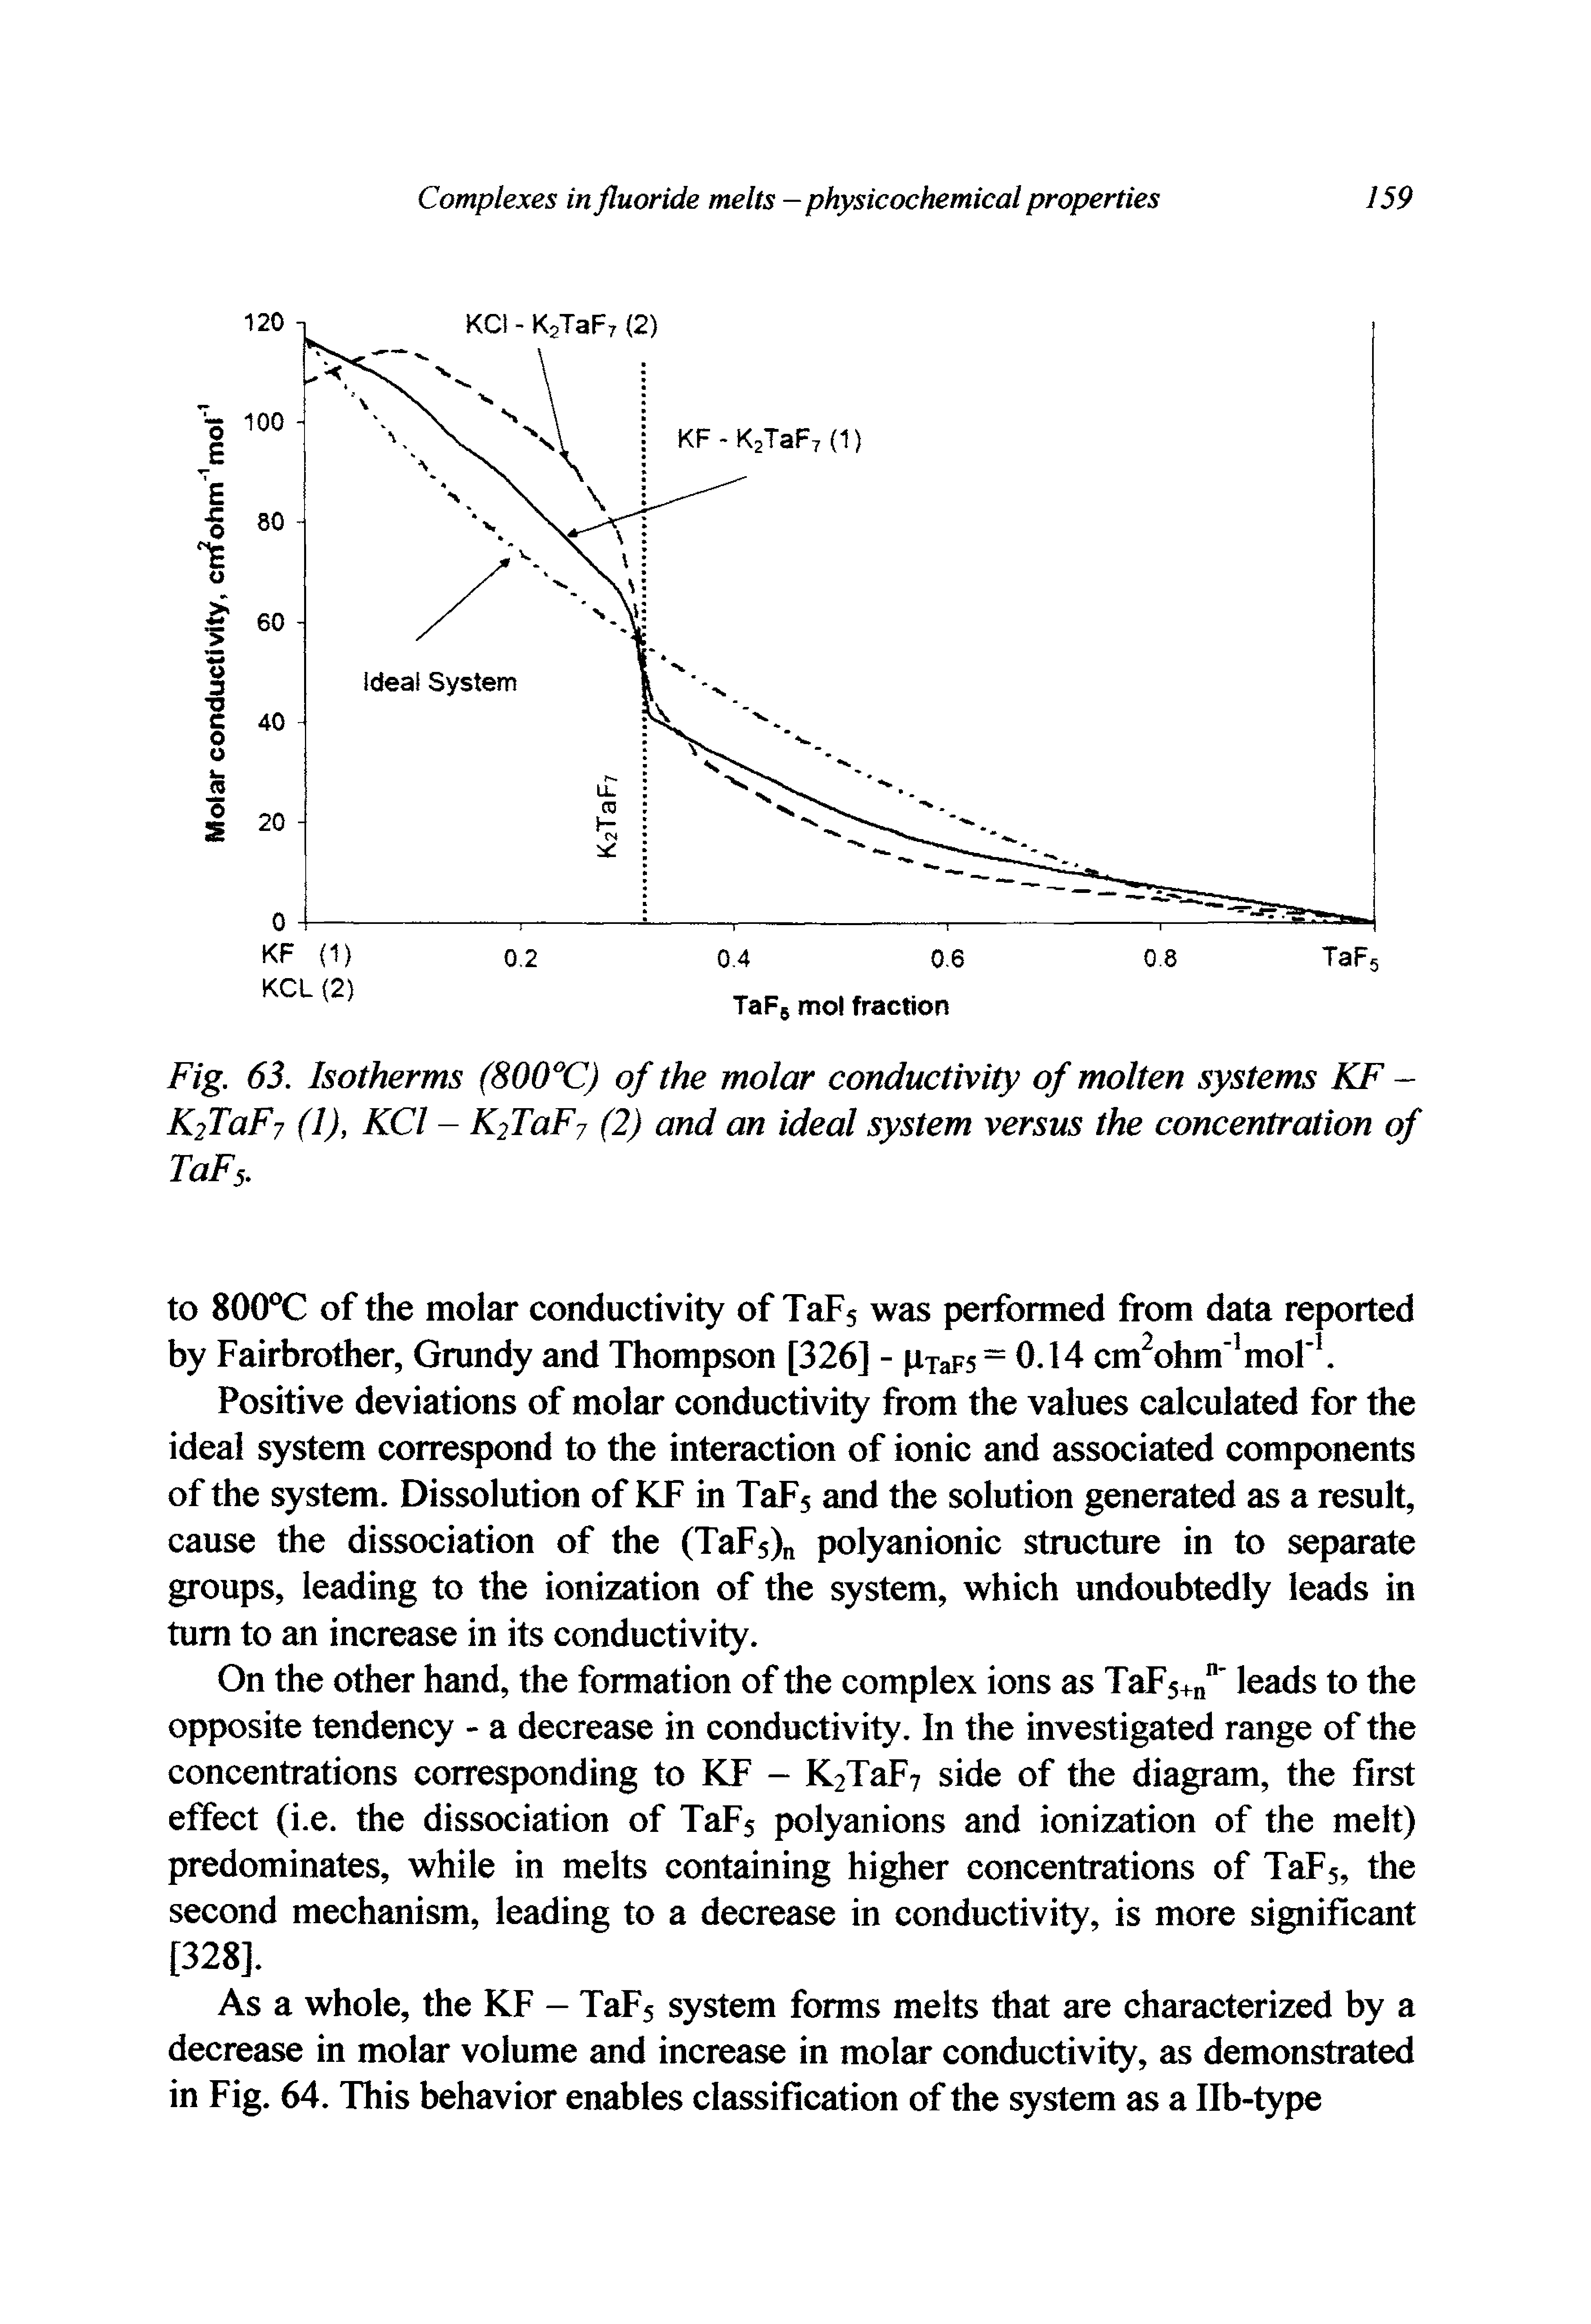 Fig. 63. Isotherms (800°C) of the molar conductivity of molten systems KF -KfTaFj (1), KCl - K FaF7 (2) and an ideal system versus the concentration of TaFs.